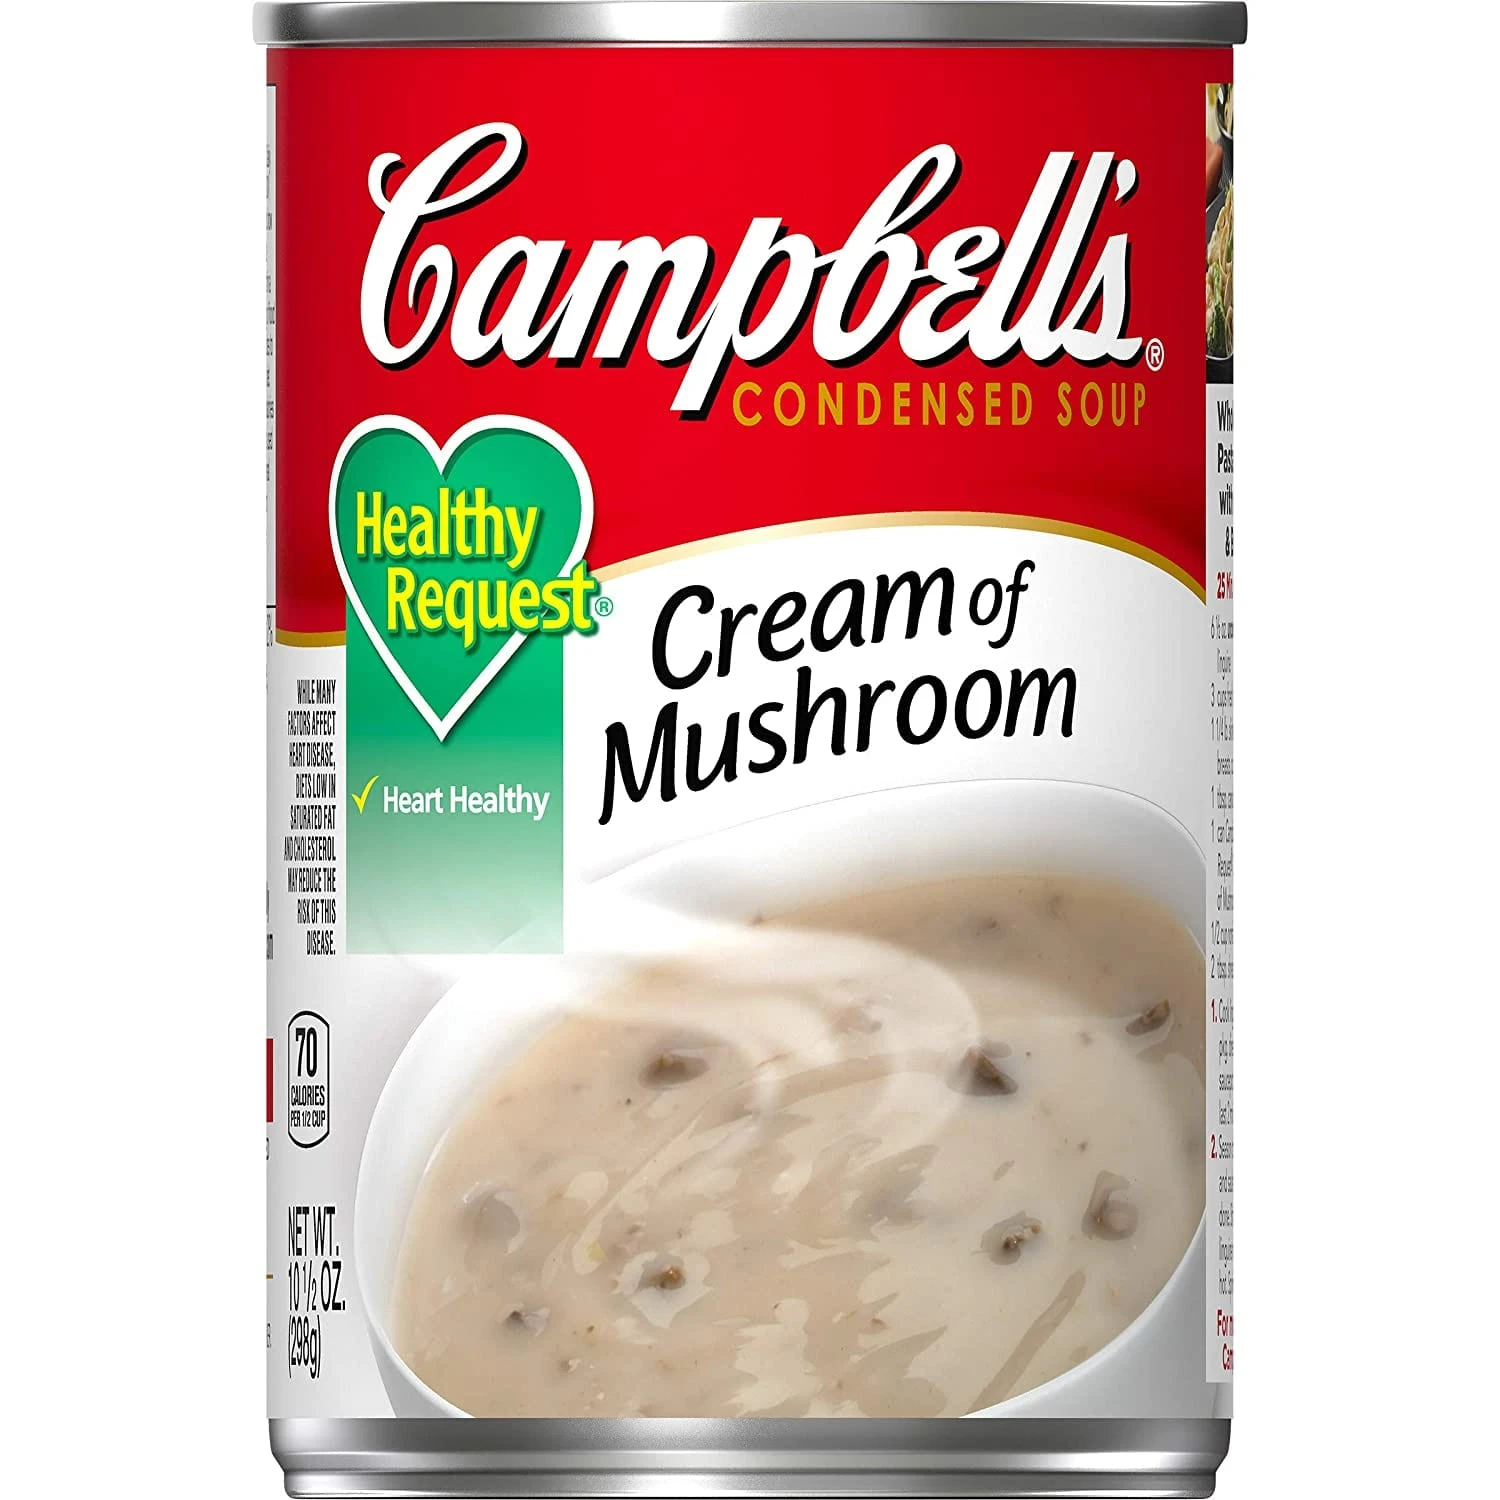 Campbell's Condensed Healthy Request Cream of Mushroom Soup
